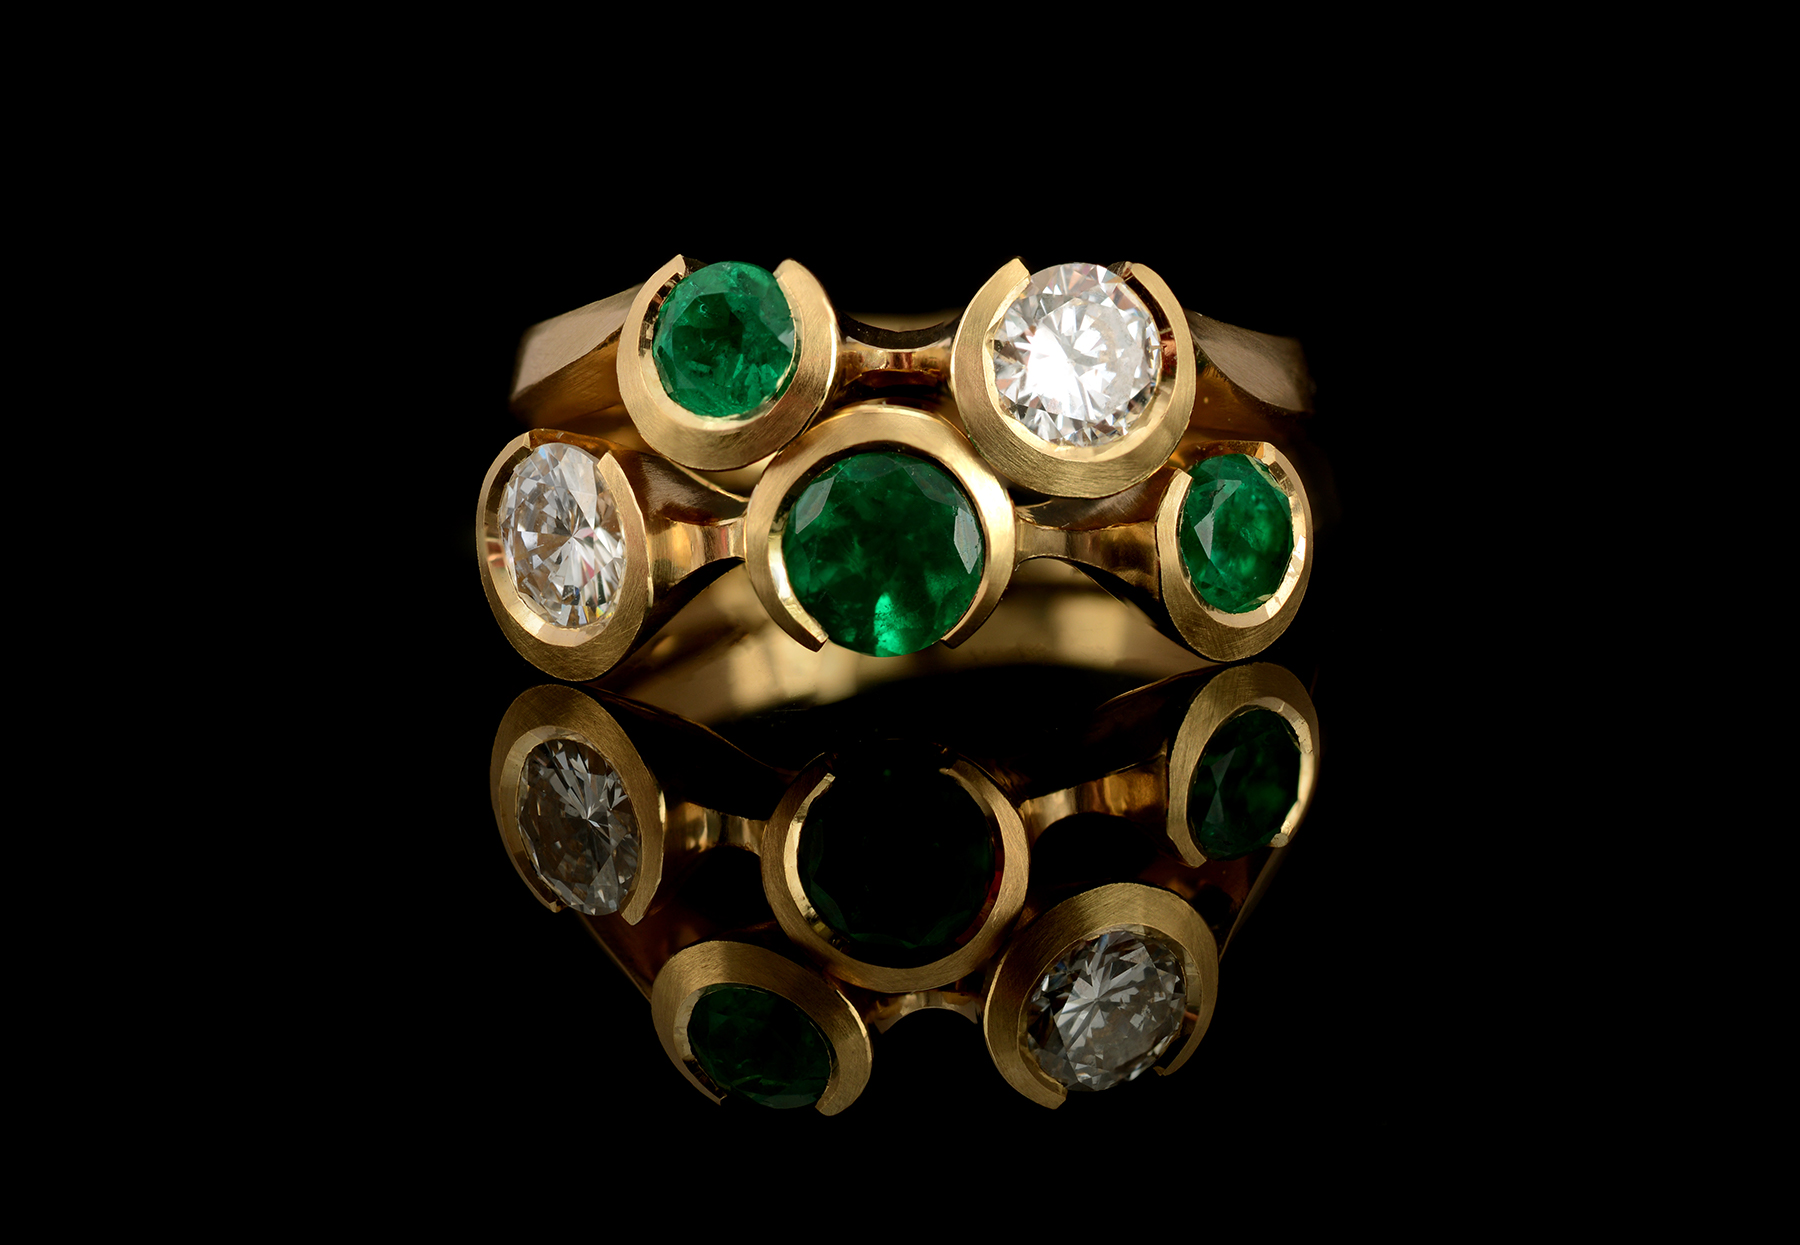 Bespoke Arris carved yellow gold rings set with emeralds and diamonds